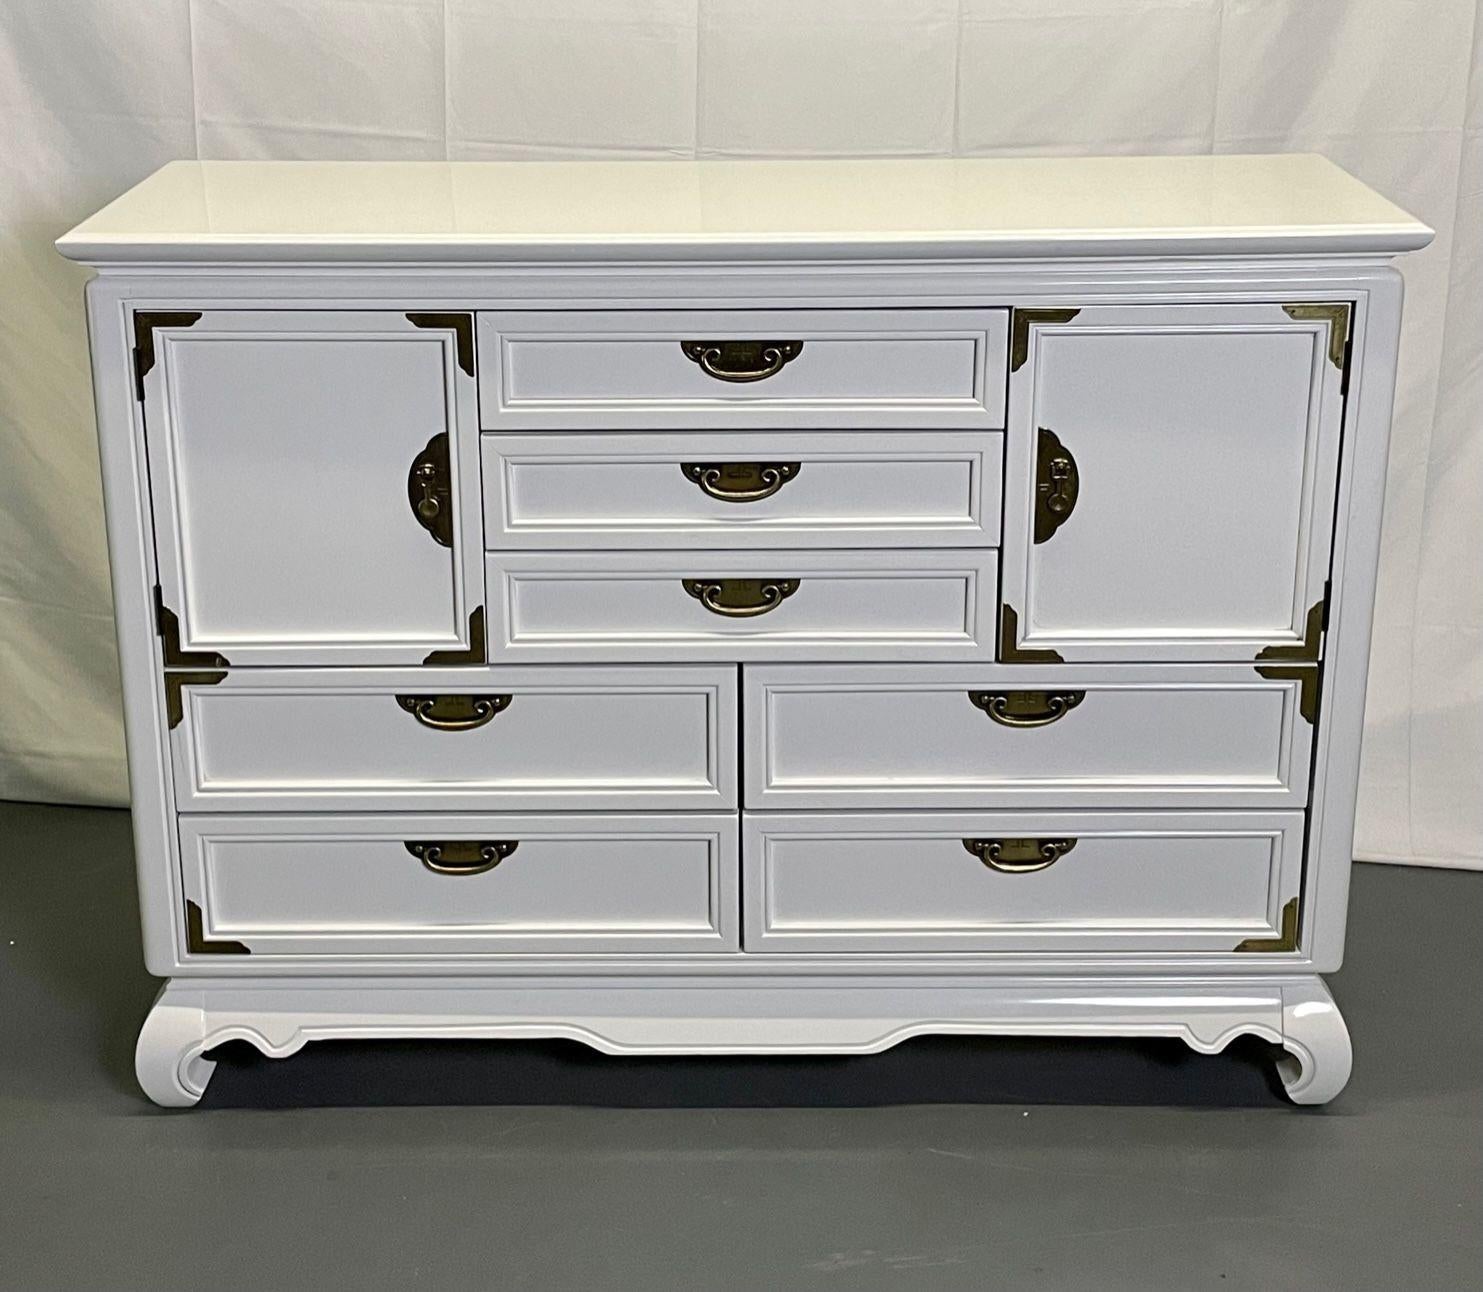 A White Lacquered Campaign Style Chest, Cabinet or Mini Armiore
A chest or cabinet of campaign style done over in the Hollywood Regency Style having a fine white lacquered finish. A pair of large storage doors flanking three drawers over two by two